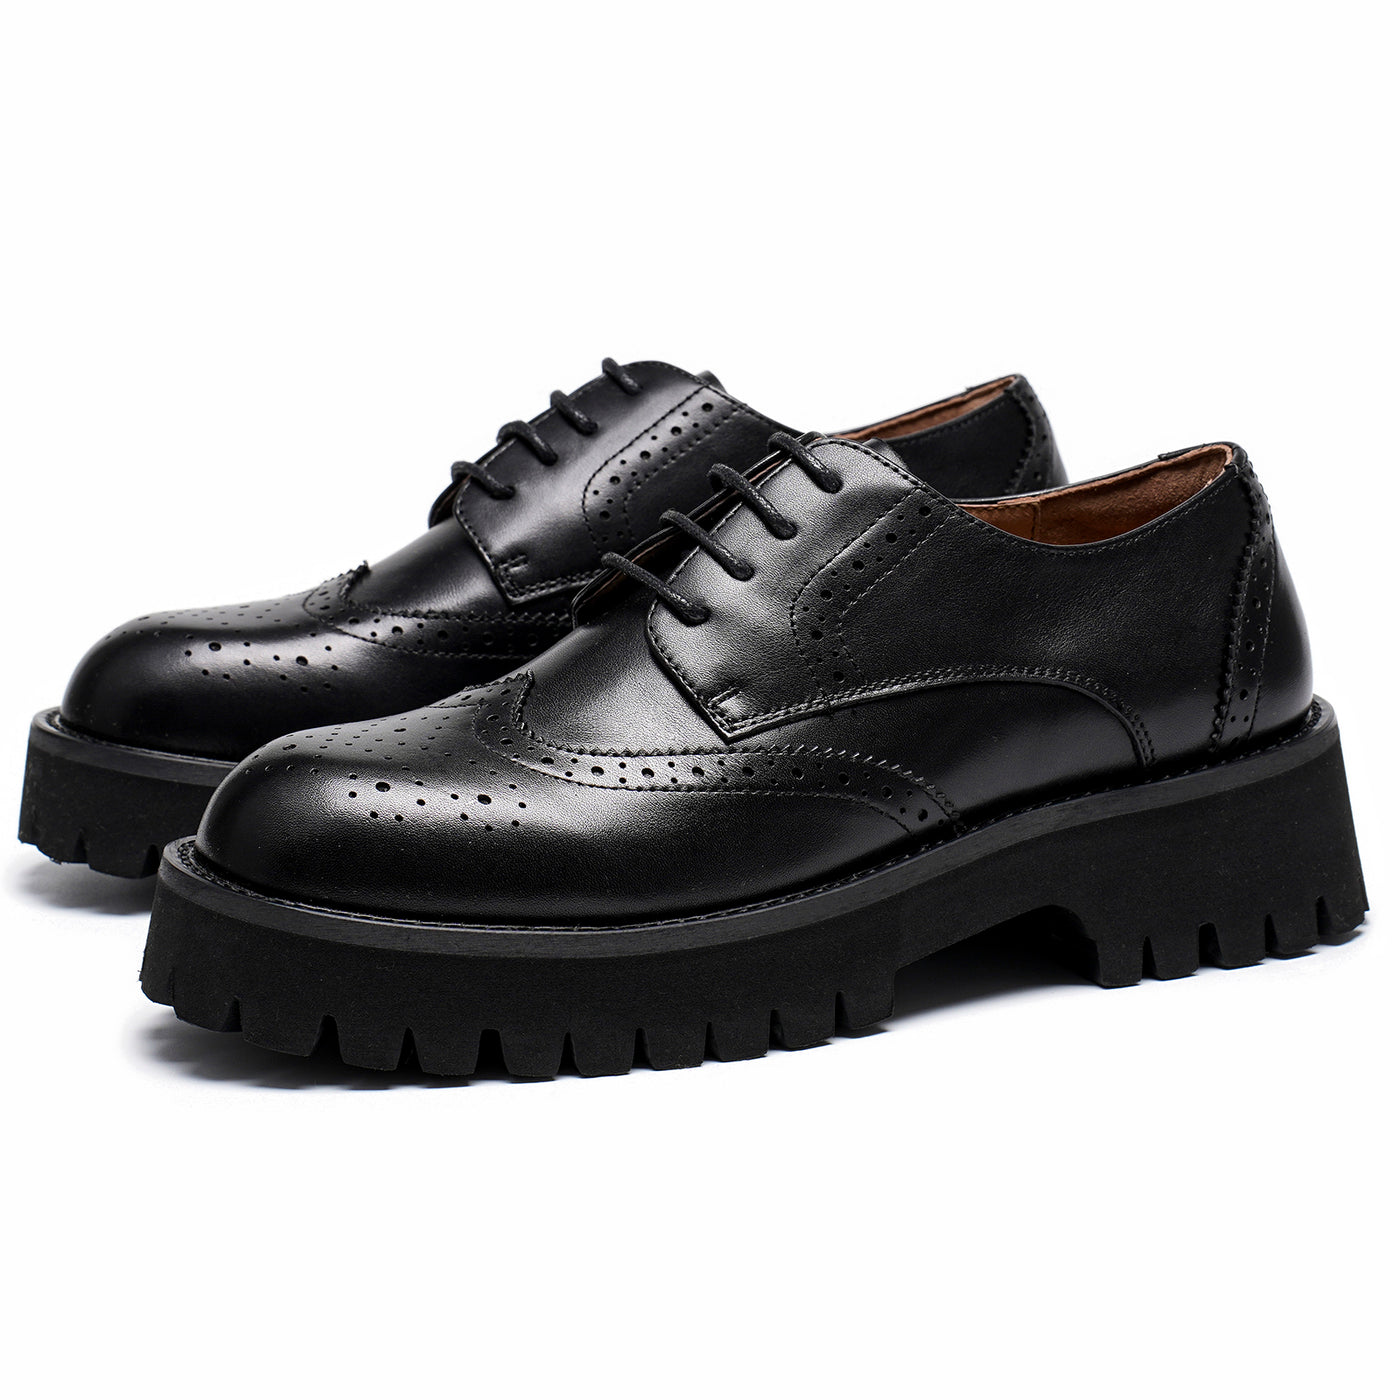 BEAU TODAY Women's Chunky Oxfords Platform Leather Lace Up Oxfords Comfort Lug Sole Business Dress Office Shoes